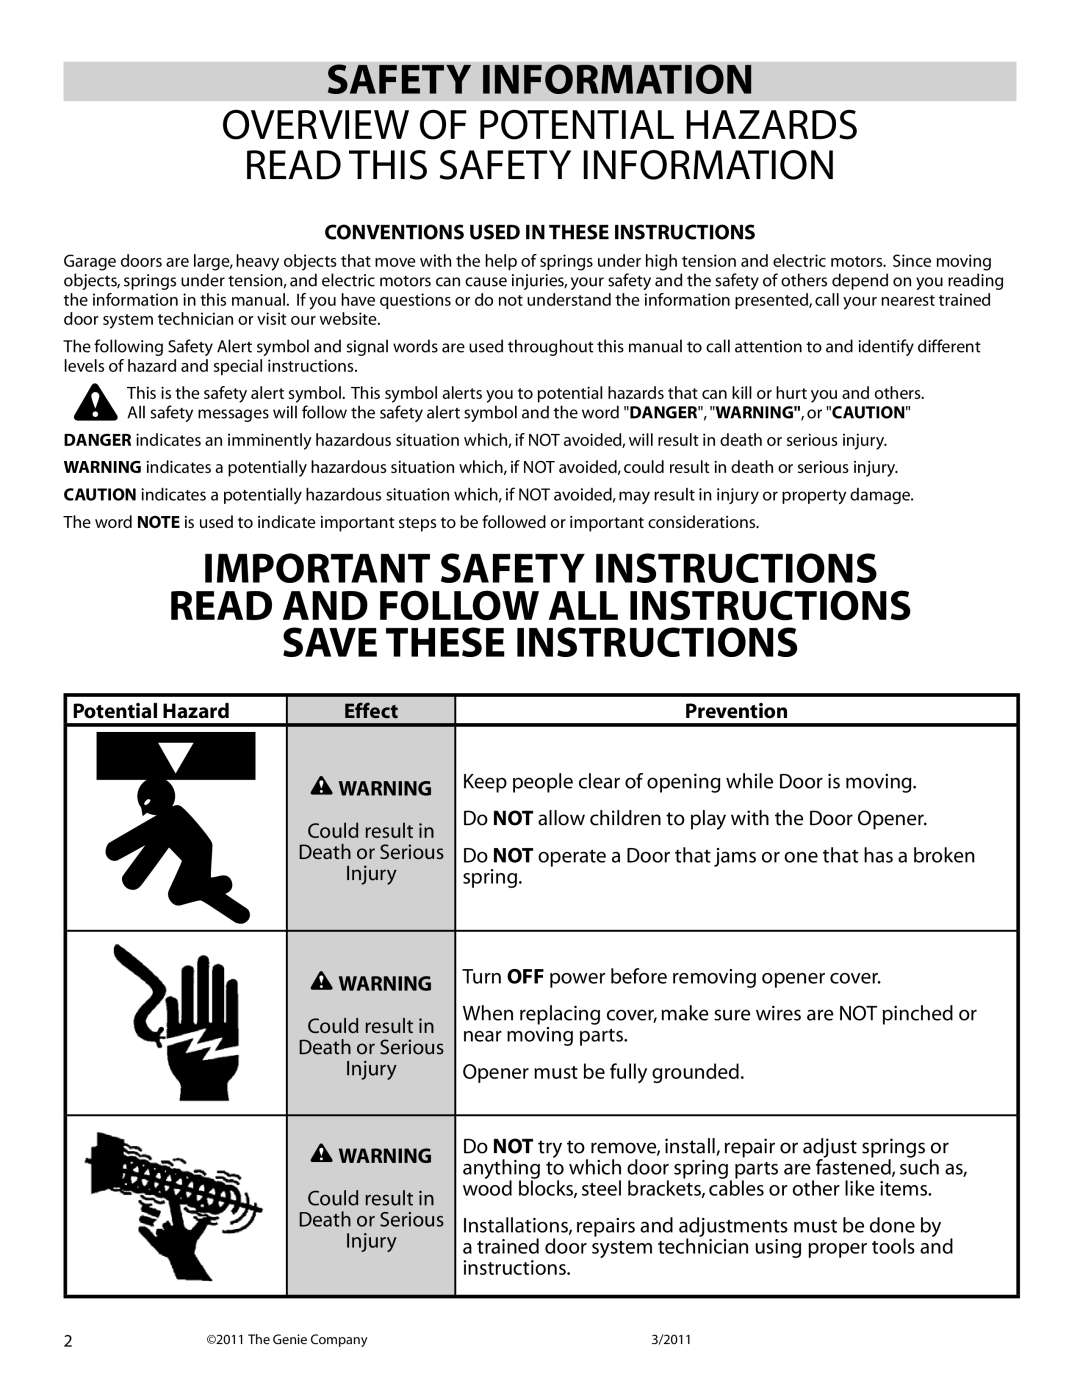 Genie 4042 manual Safety Information, Conventions Used In These Instructions, Potential Hazard, Prevention 